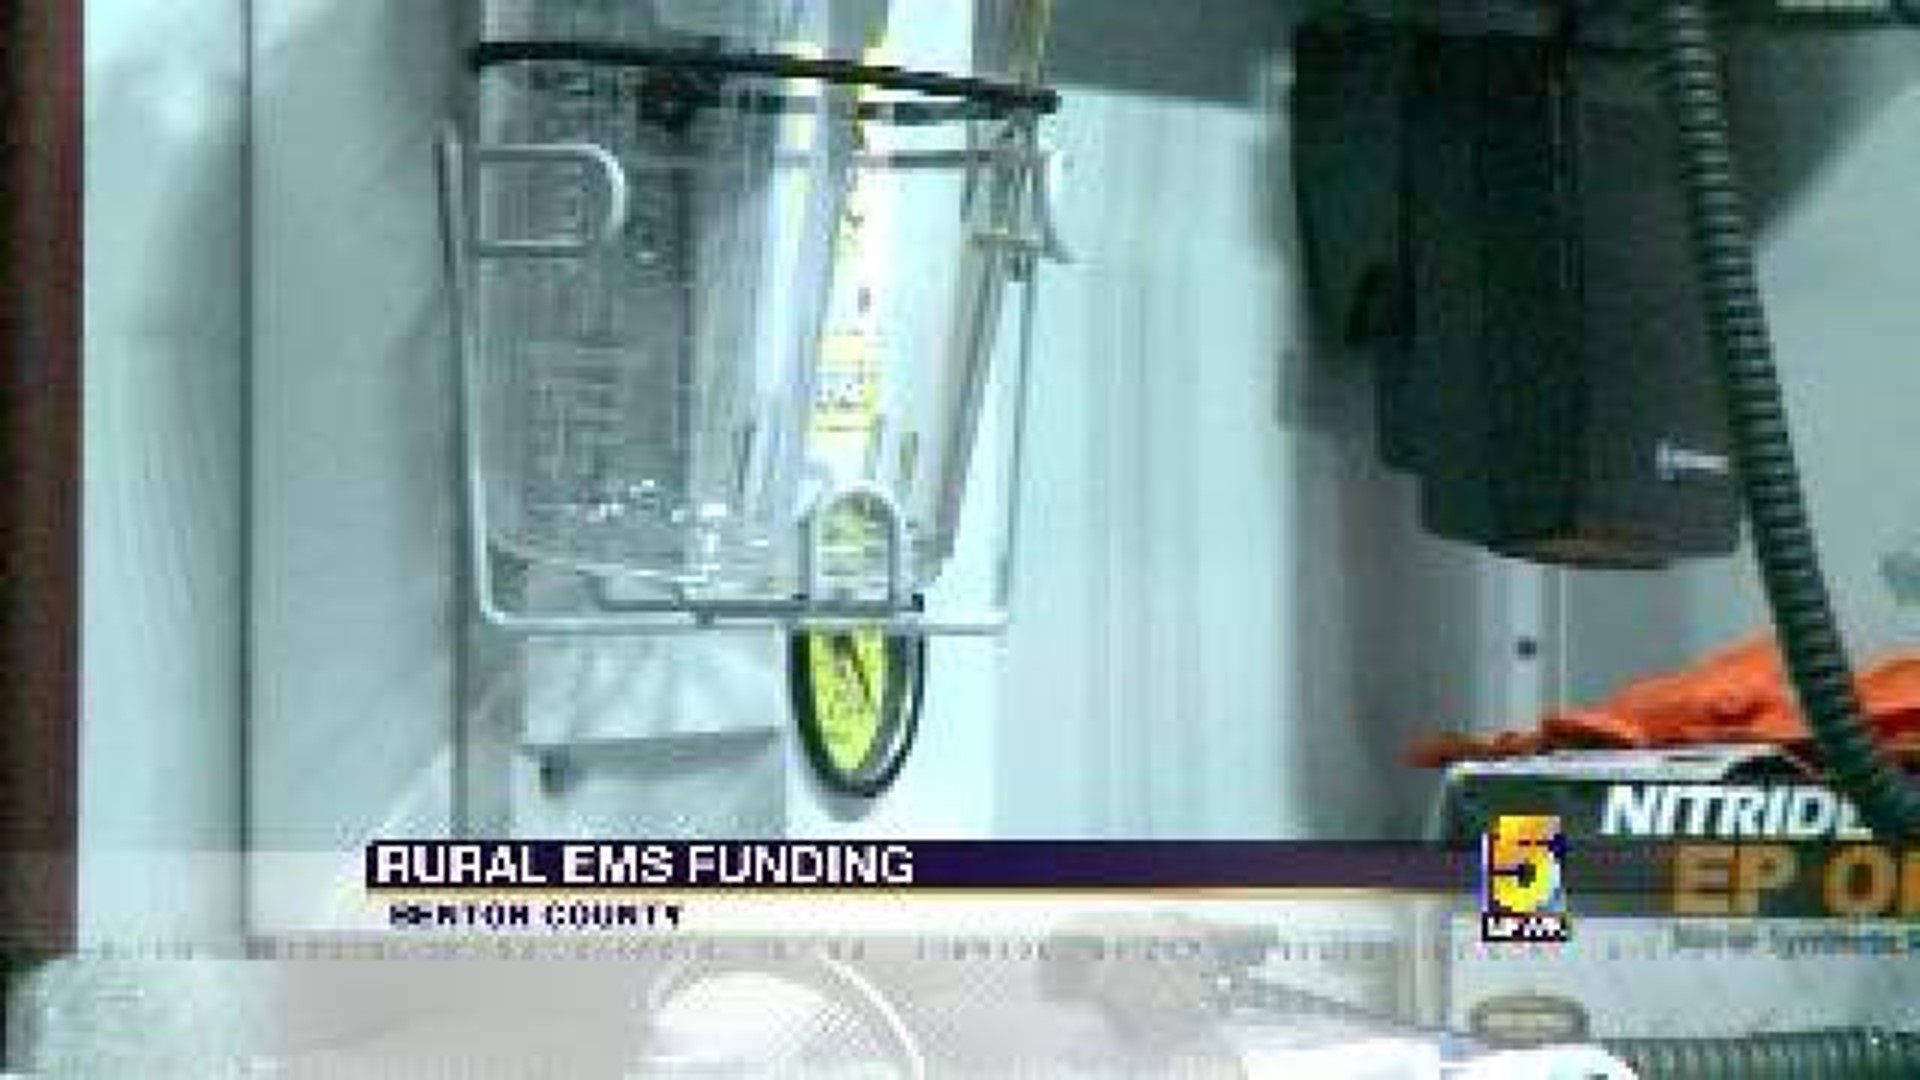 EMS Service To Continue In Rural Areas